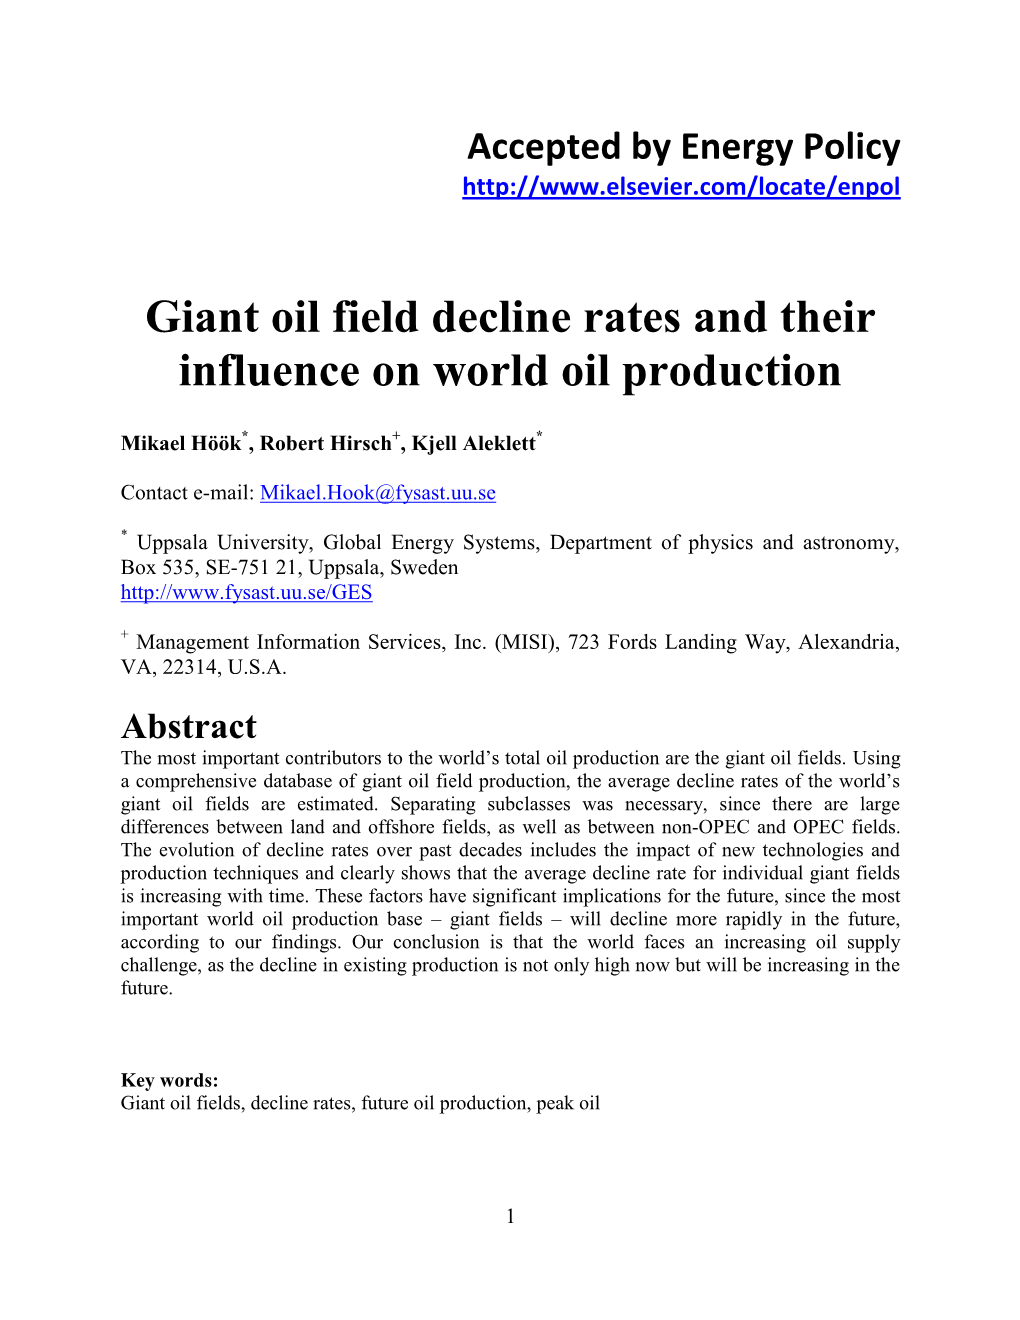 Giant Oil Field Decline Rates and Their Influence on World Oil Production